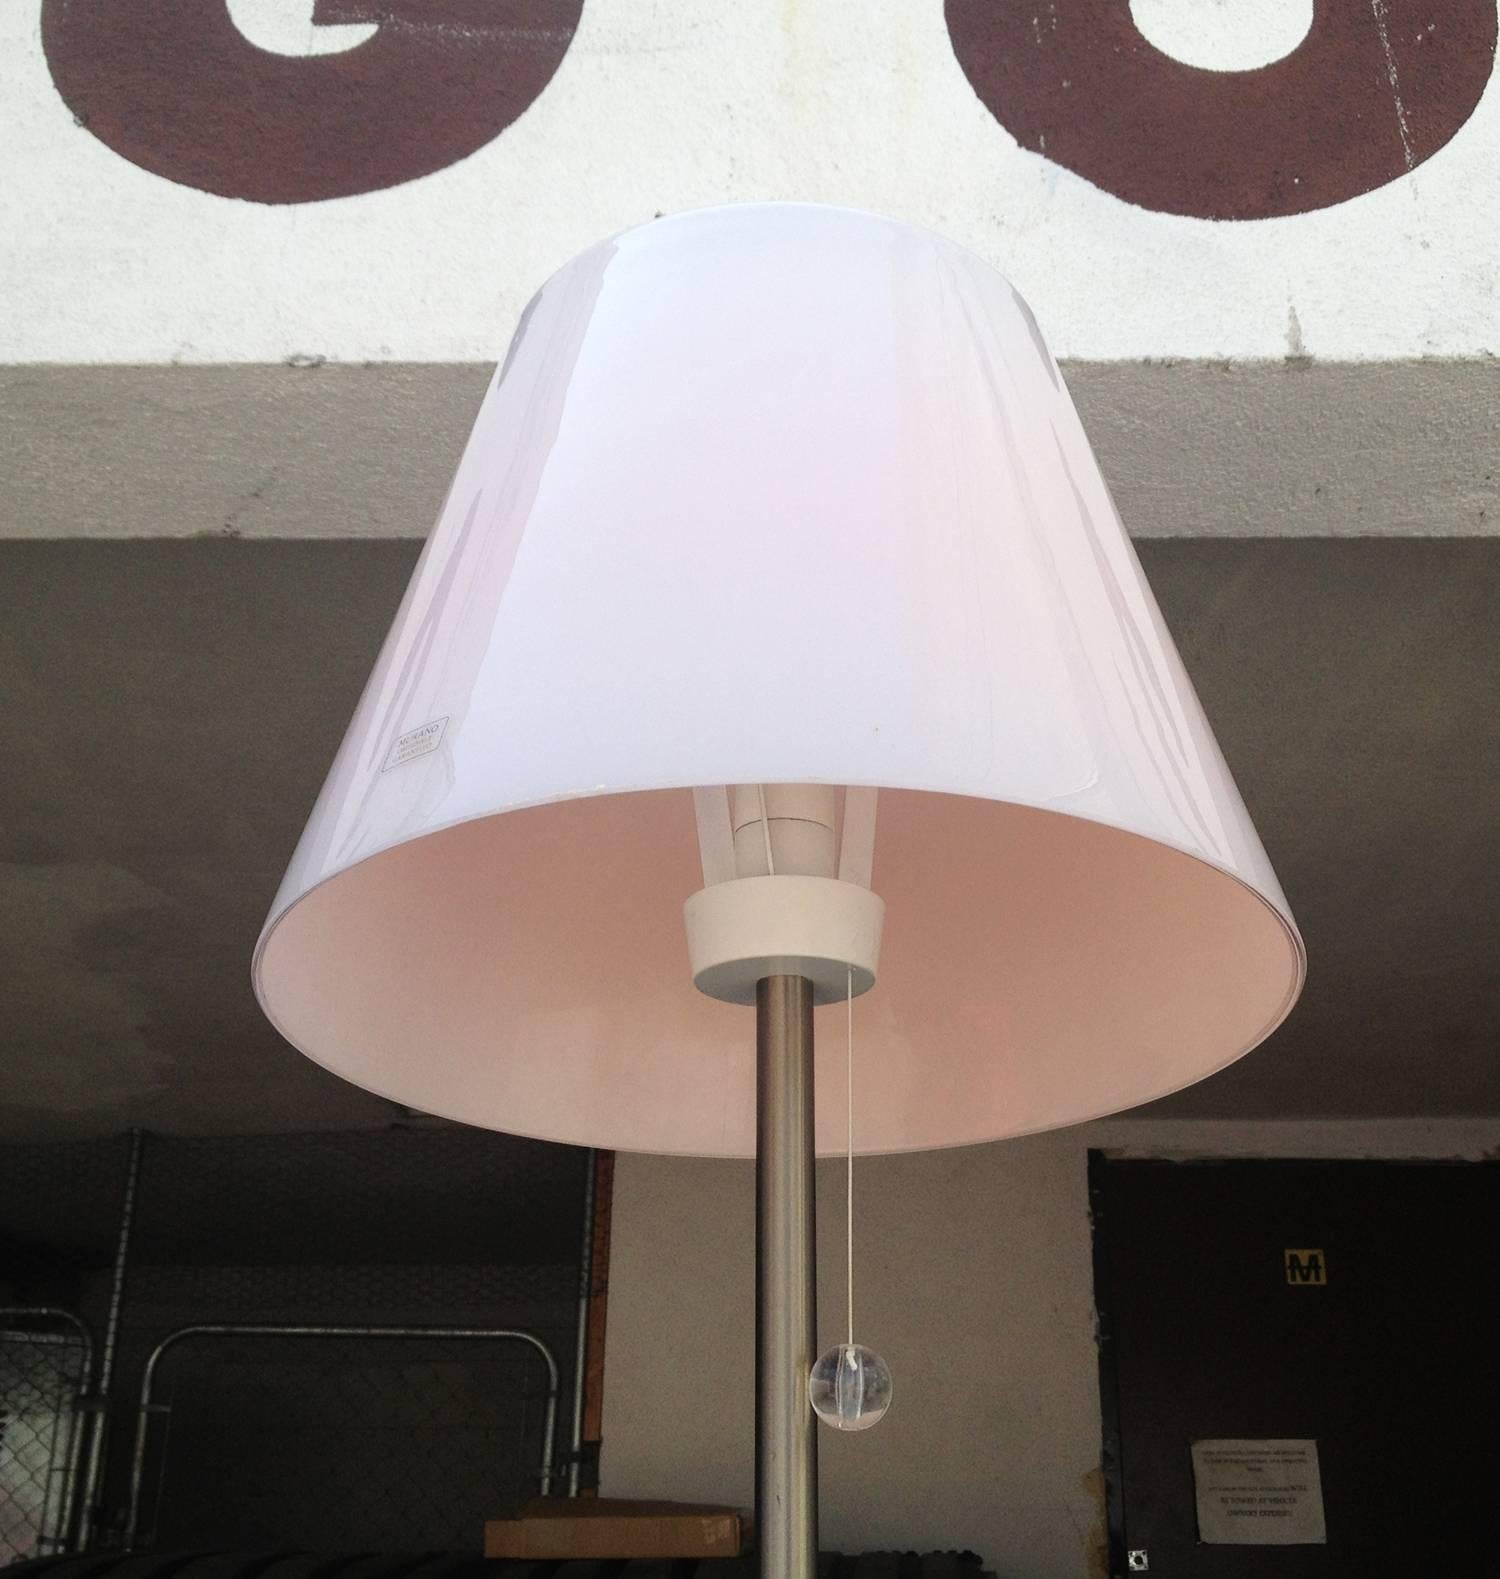 Stunning Italian floor lamp made of nickel and with a pink Murano glass shade.
The lamp is beautiful and in excellent condition, no chips or cracks to the glass shade, the label reads 